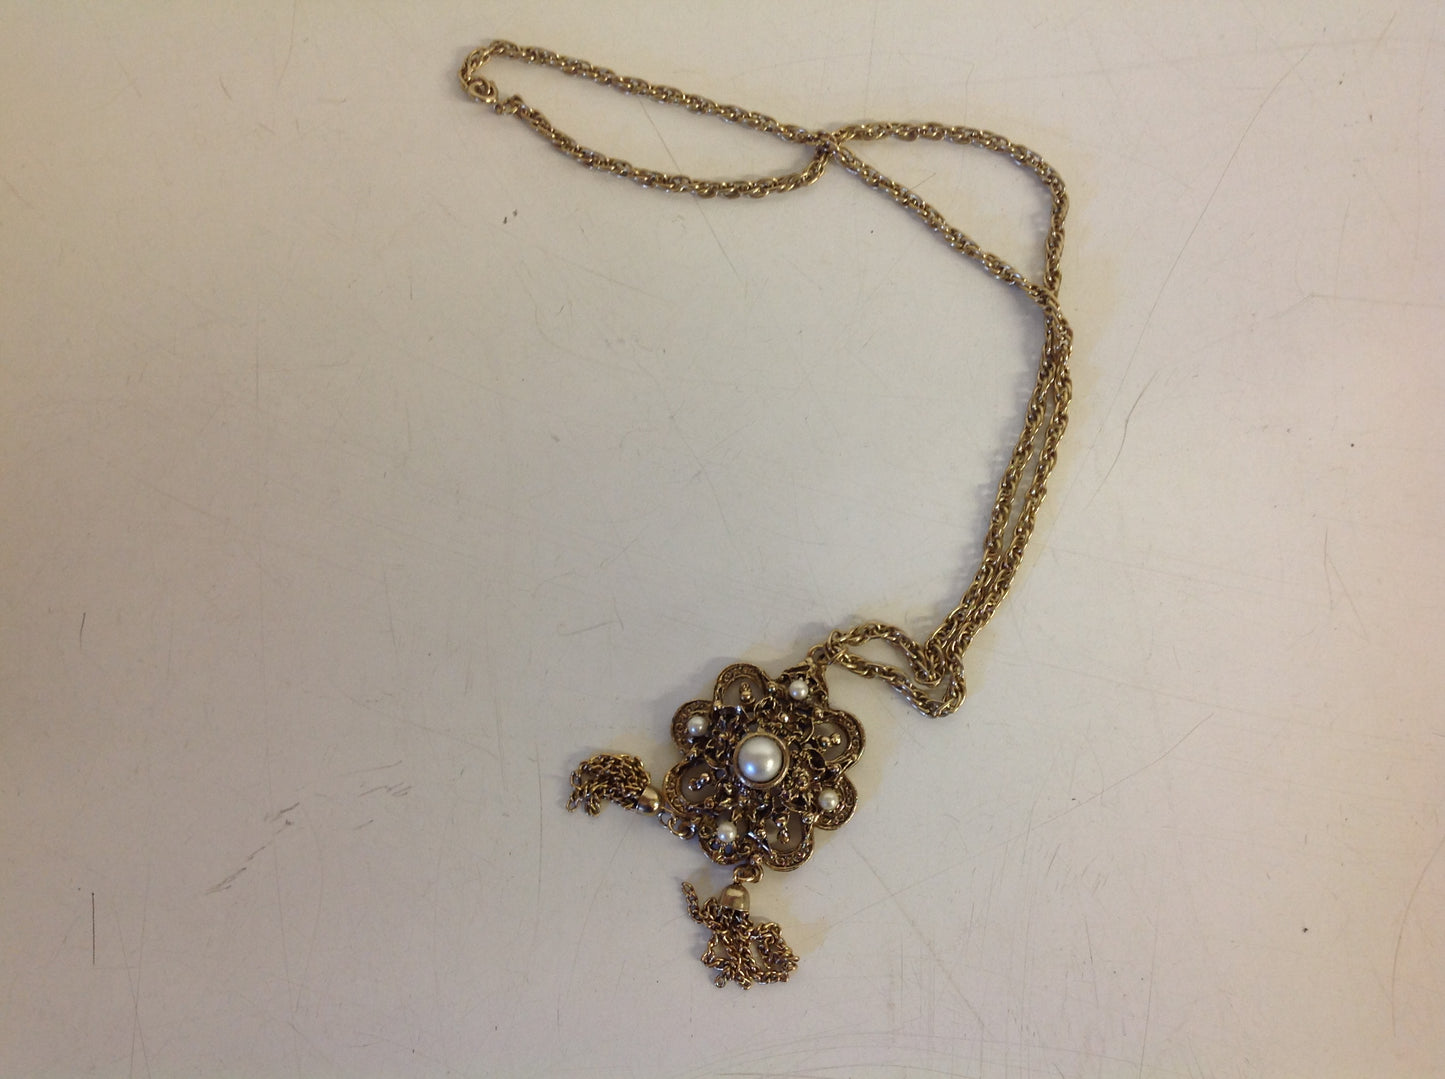 Vintage Goldtone Filigree Chain Pendant Faux Pearl Medallion With Chandelier Chain